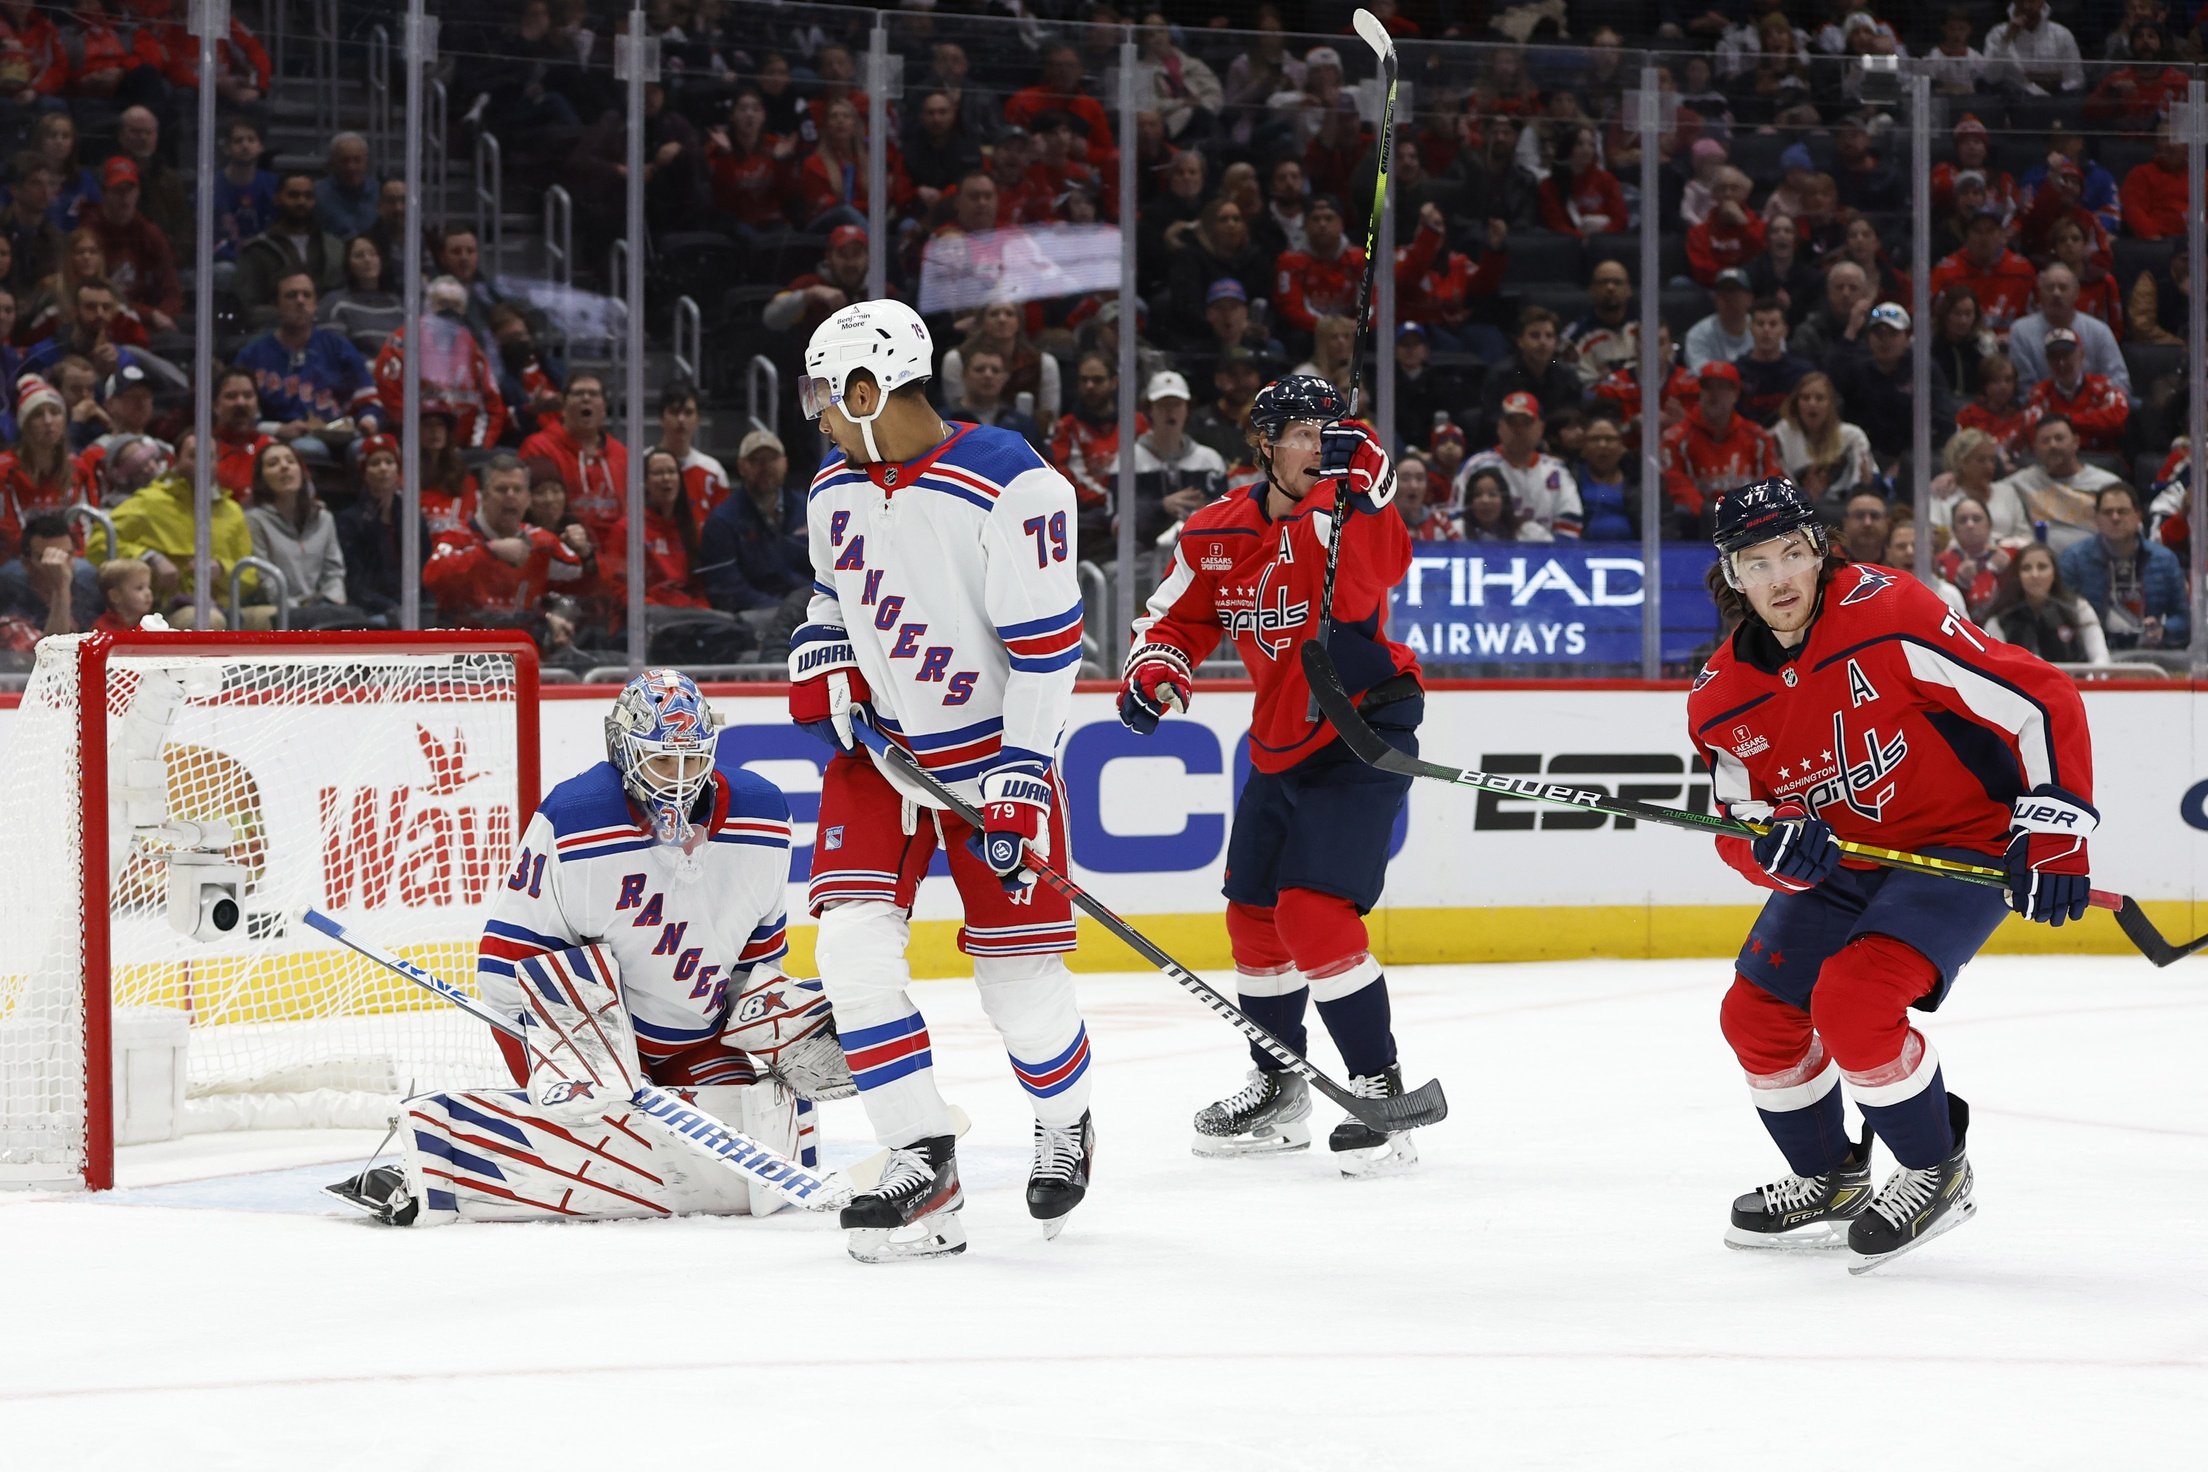 Caps Score Right After New York Rangers Use Capital Letters on Twitter